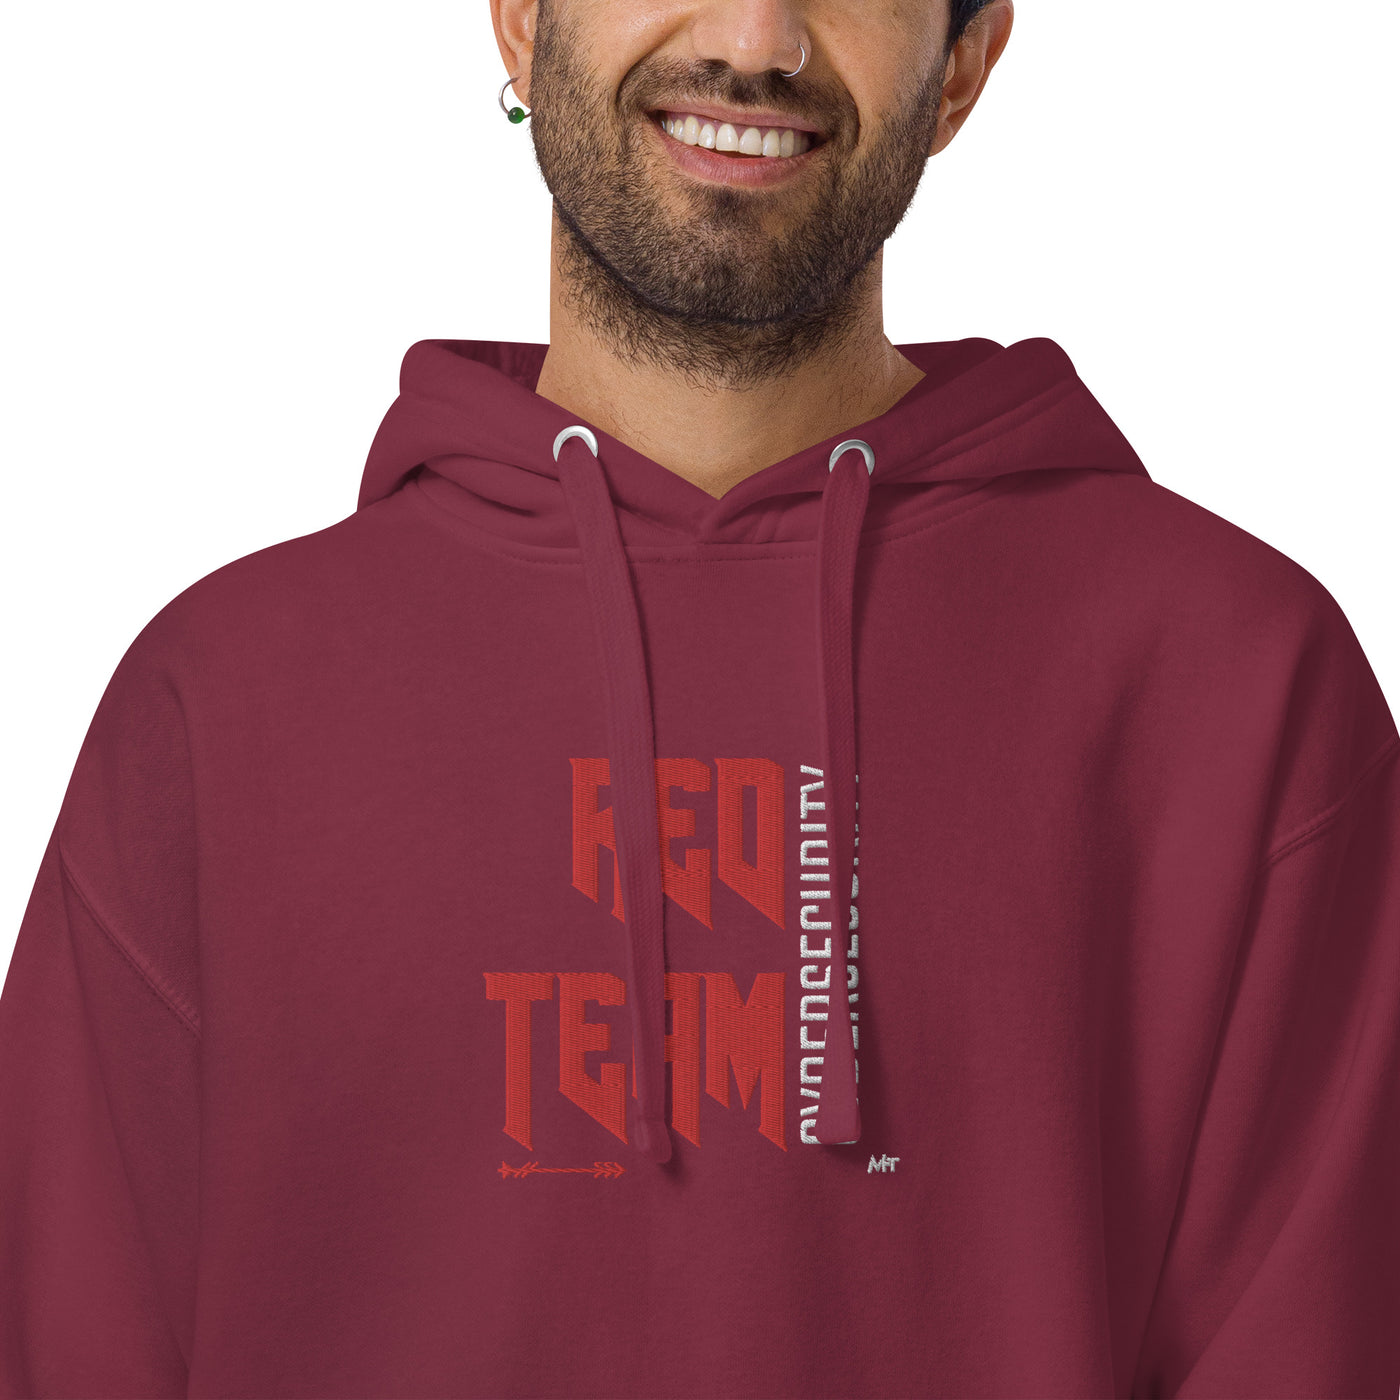 Cyber Security Red Team v9 - Unisex Hoodie Embroidered